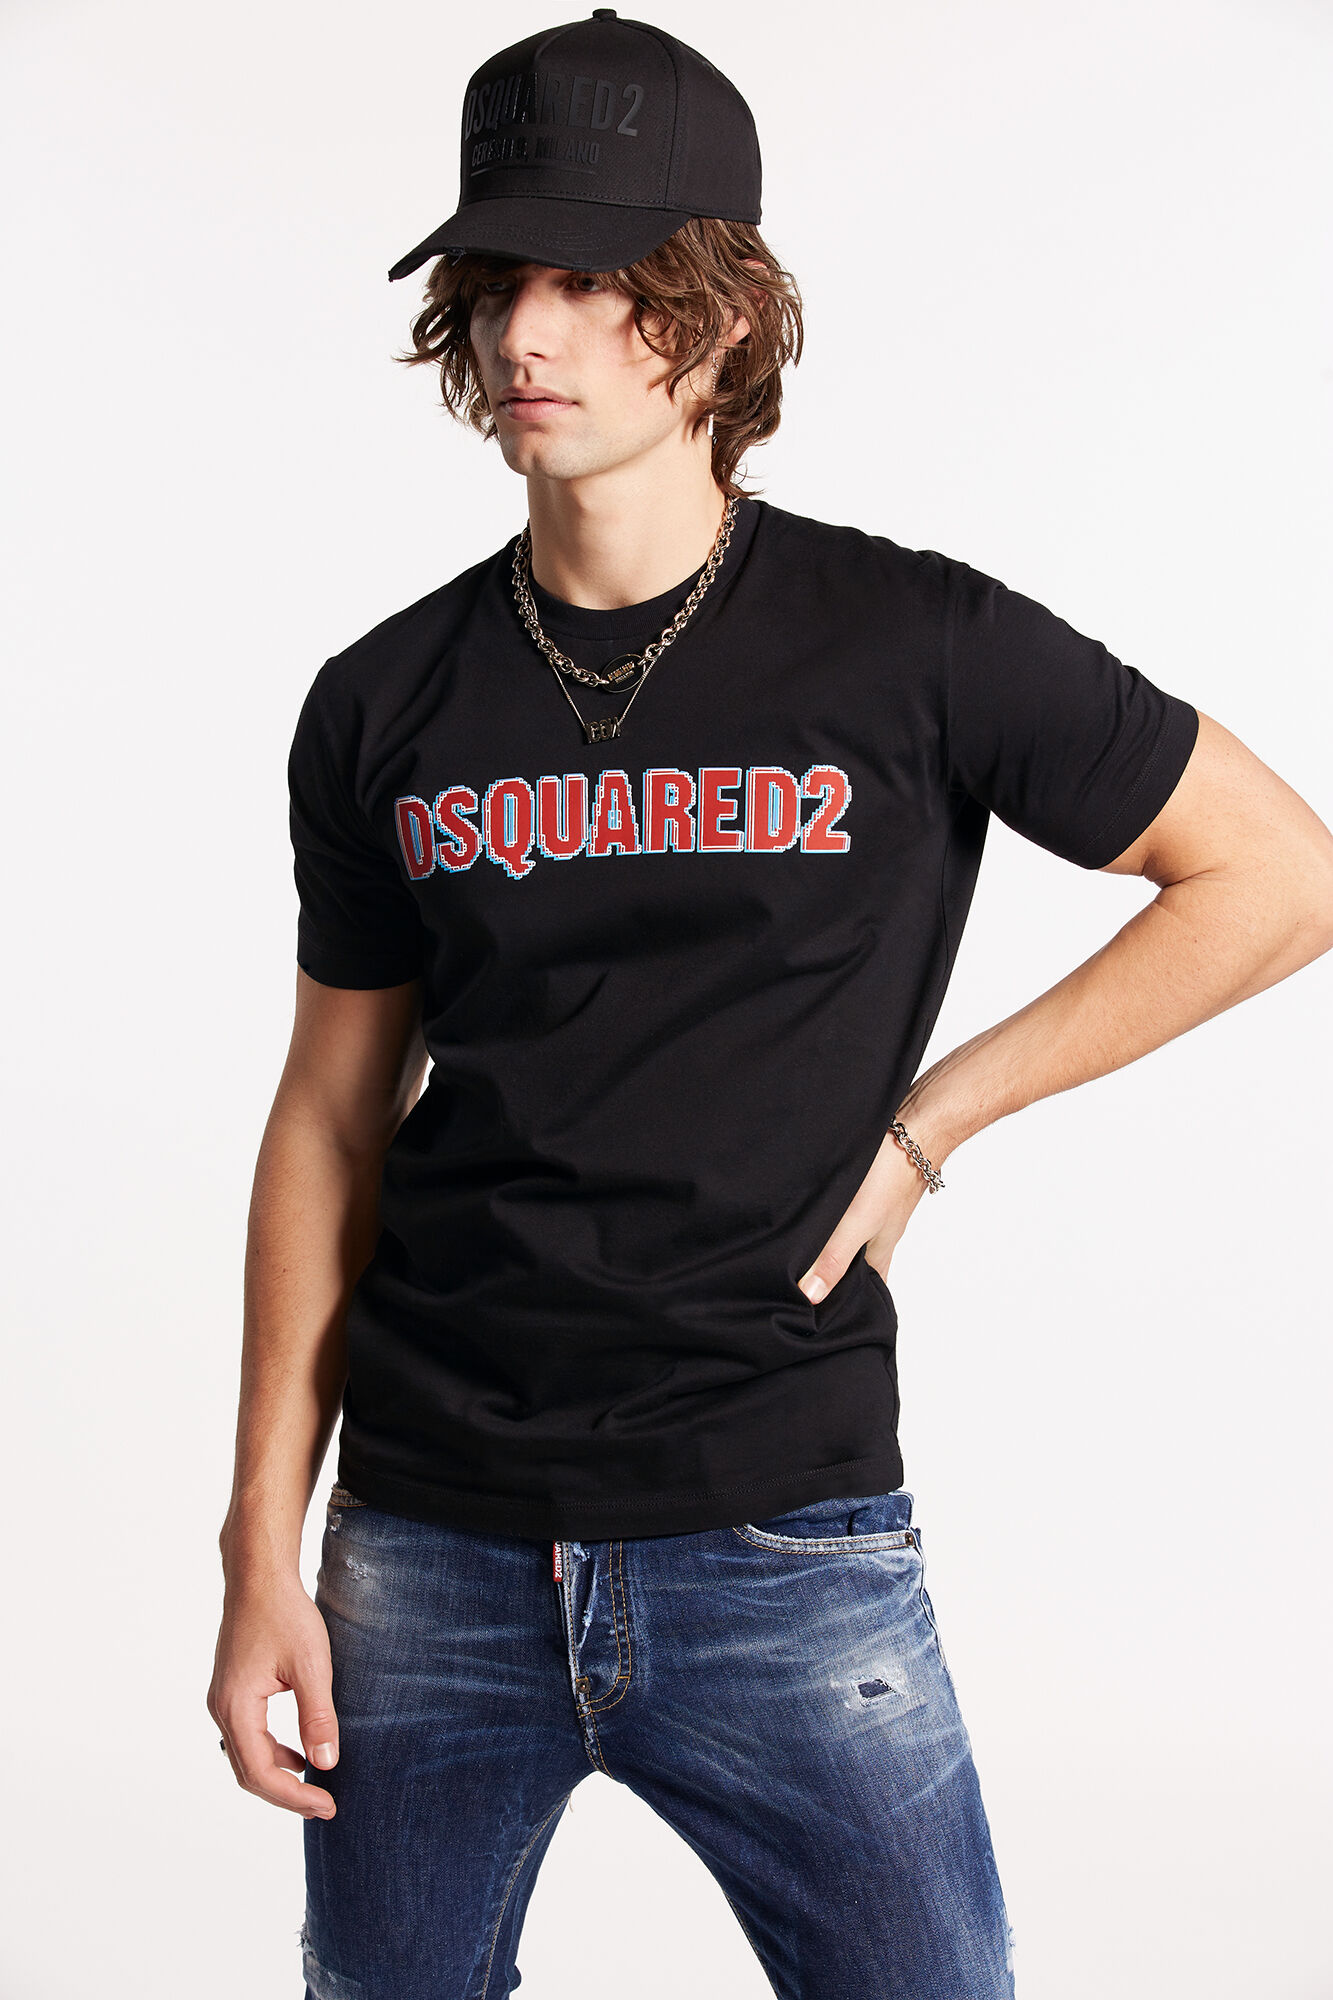 D SQUARED2 Tシャツ